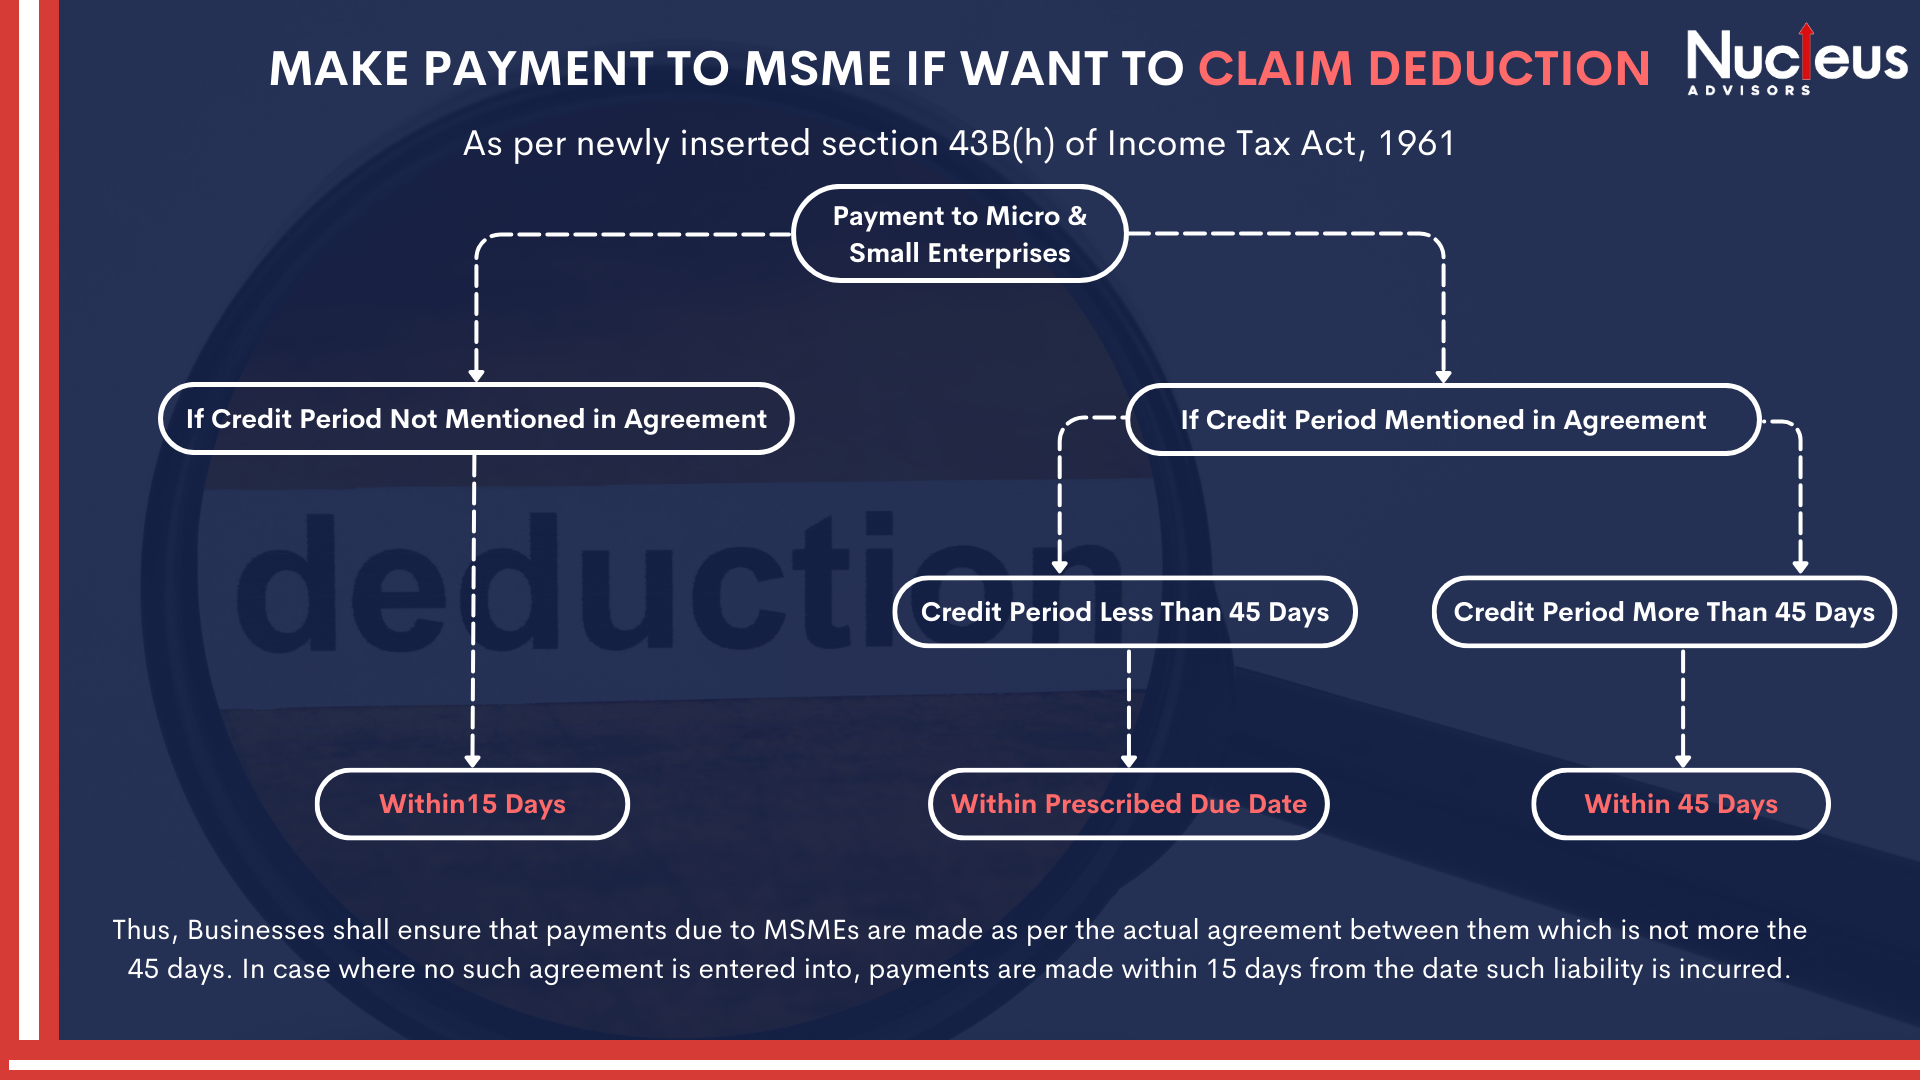 MAKE PAYMENT TO MSME IF WANT TO CLAIM DEDUCTION